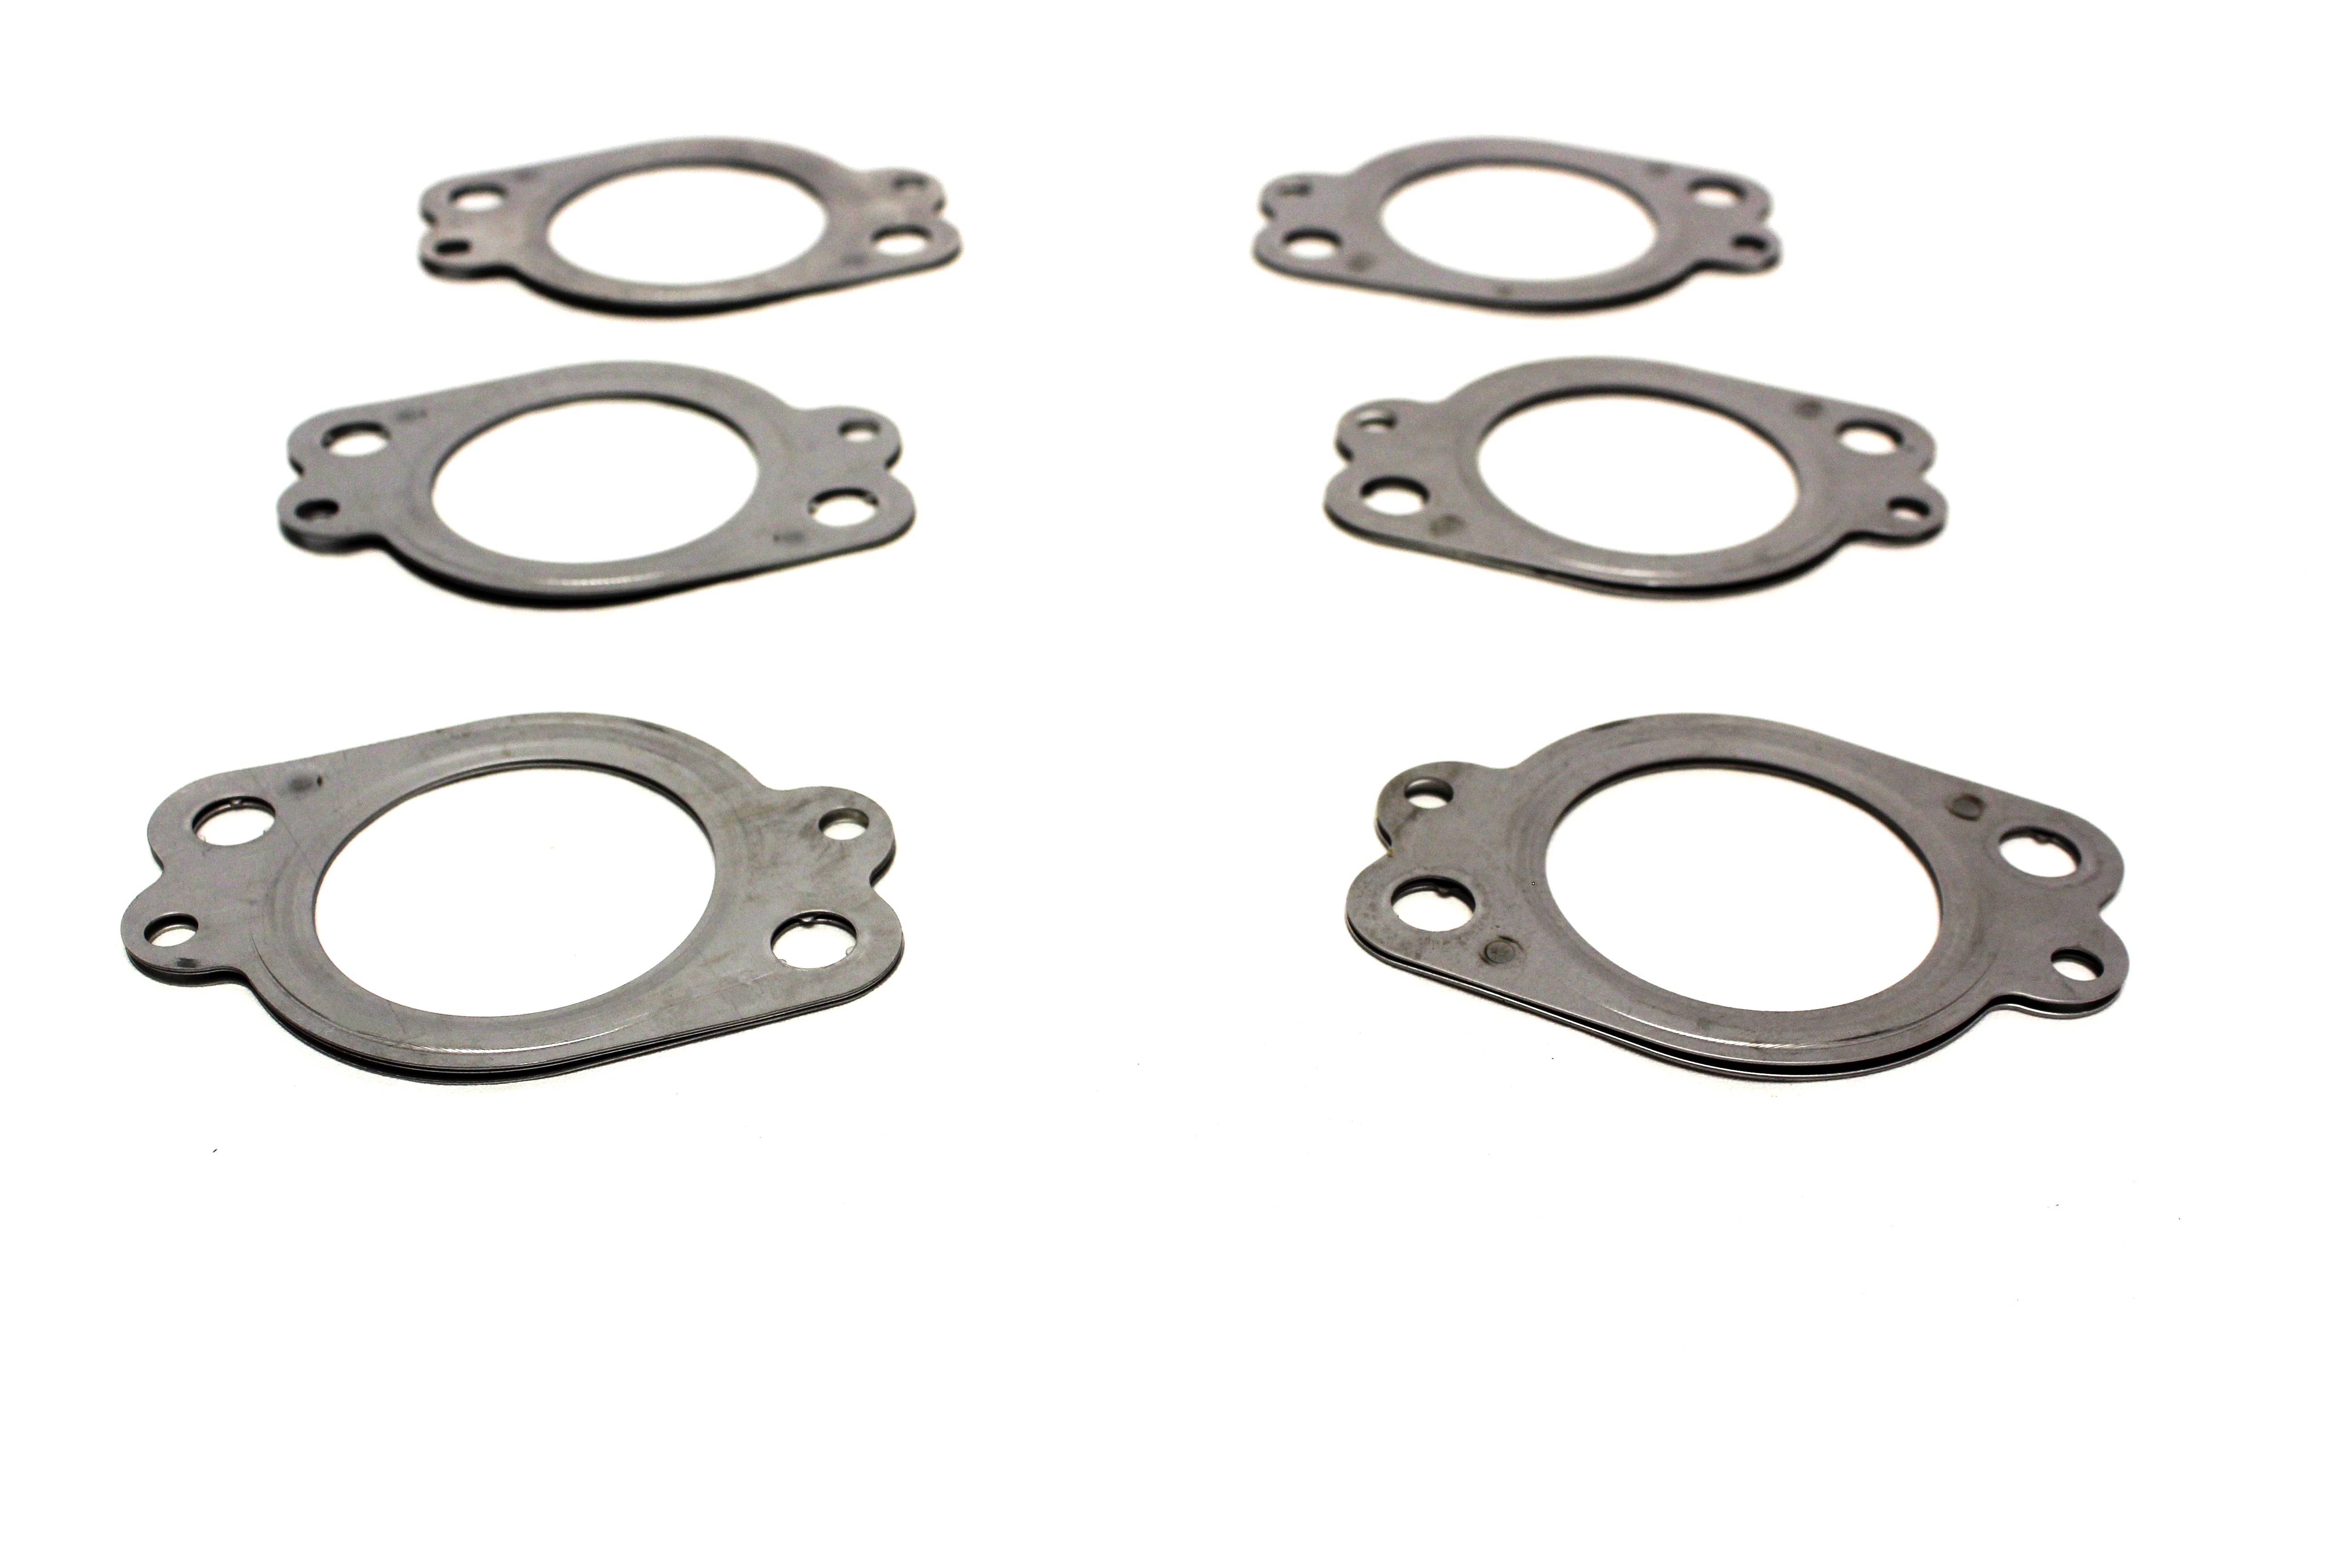 Exhaust Manifolds Gasket for Mack MP7 Engine